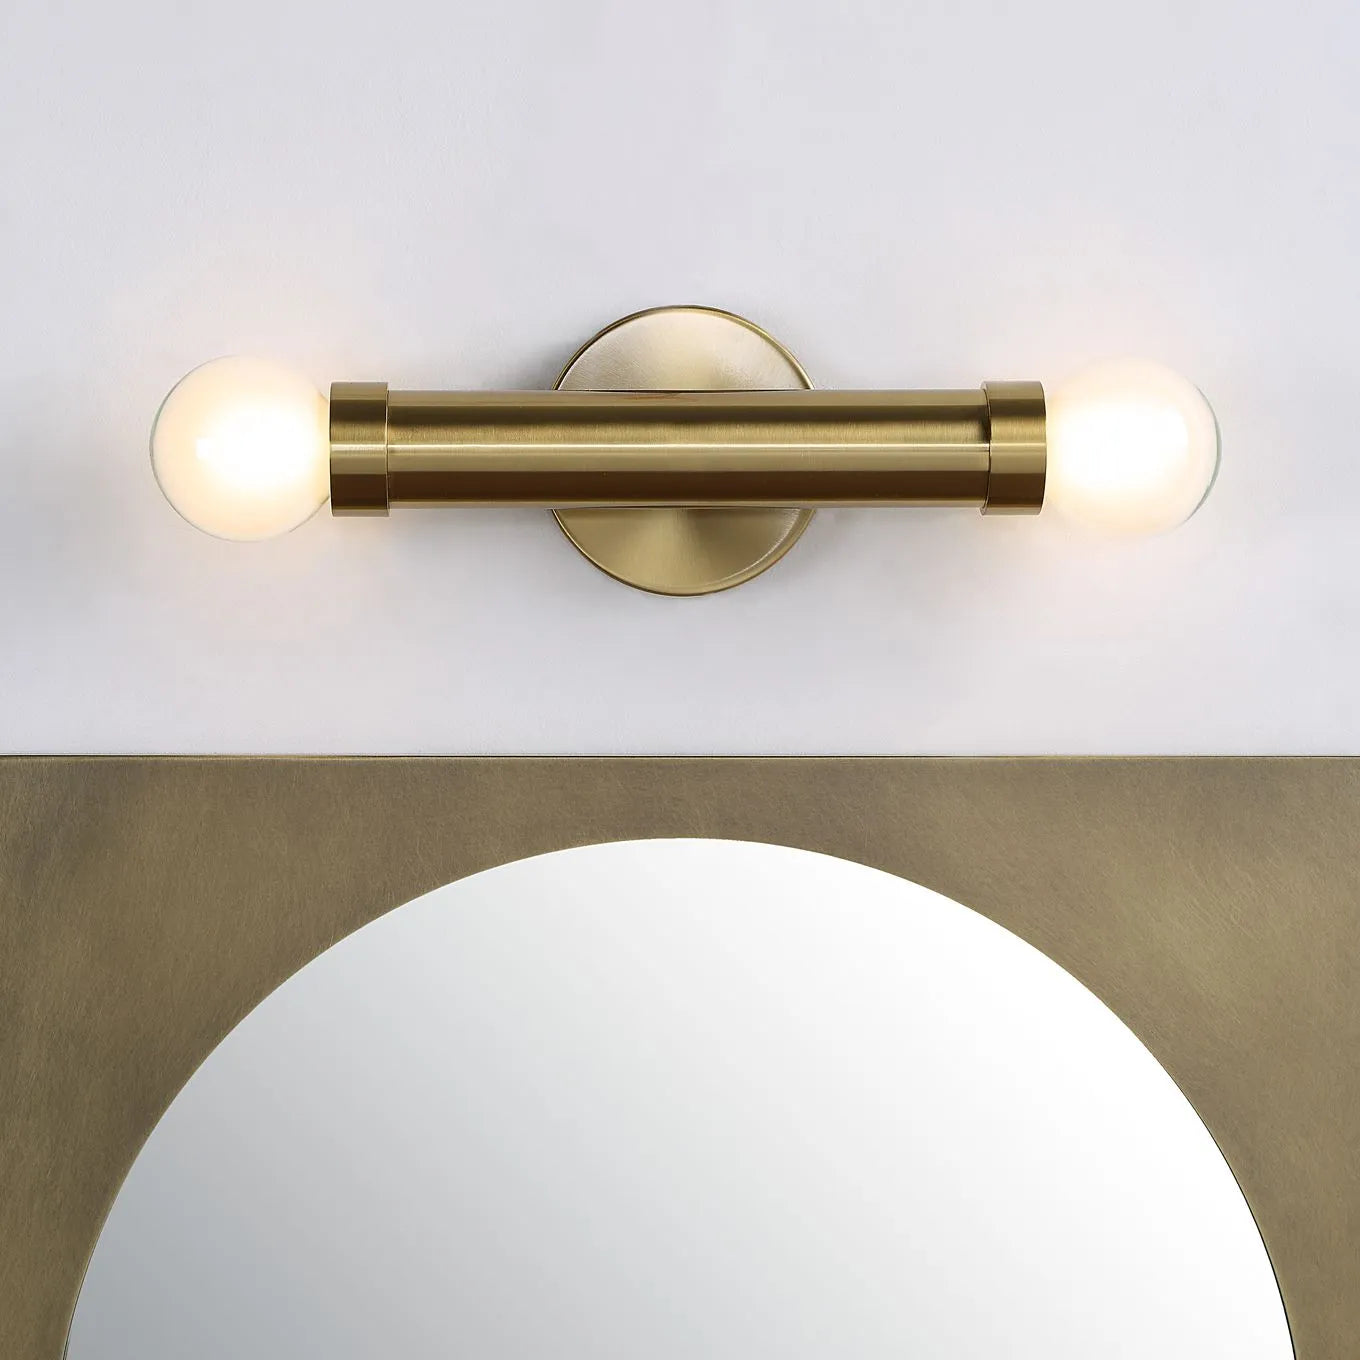 Dasia Burnished Brass Wall Sconce